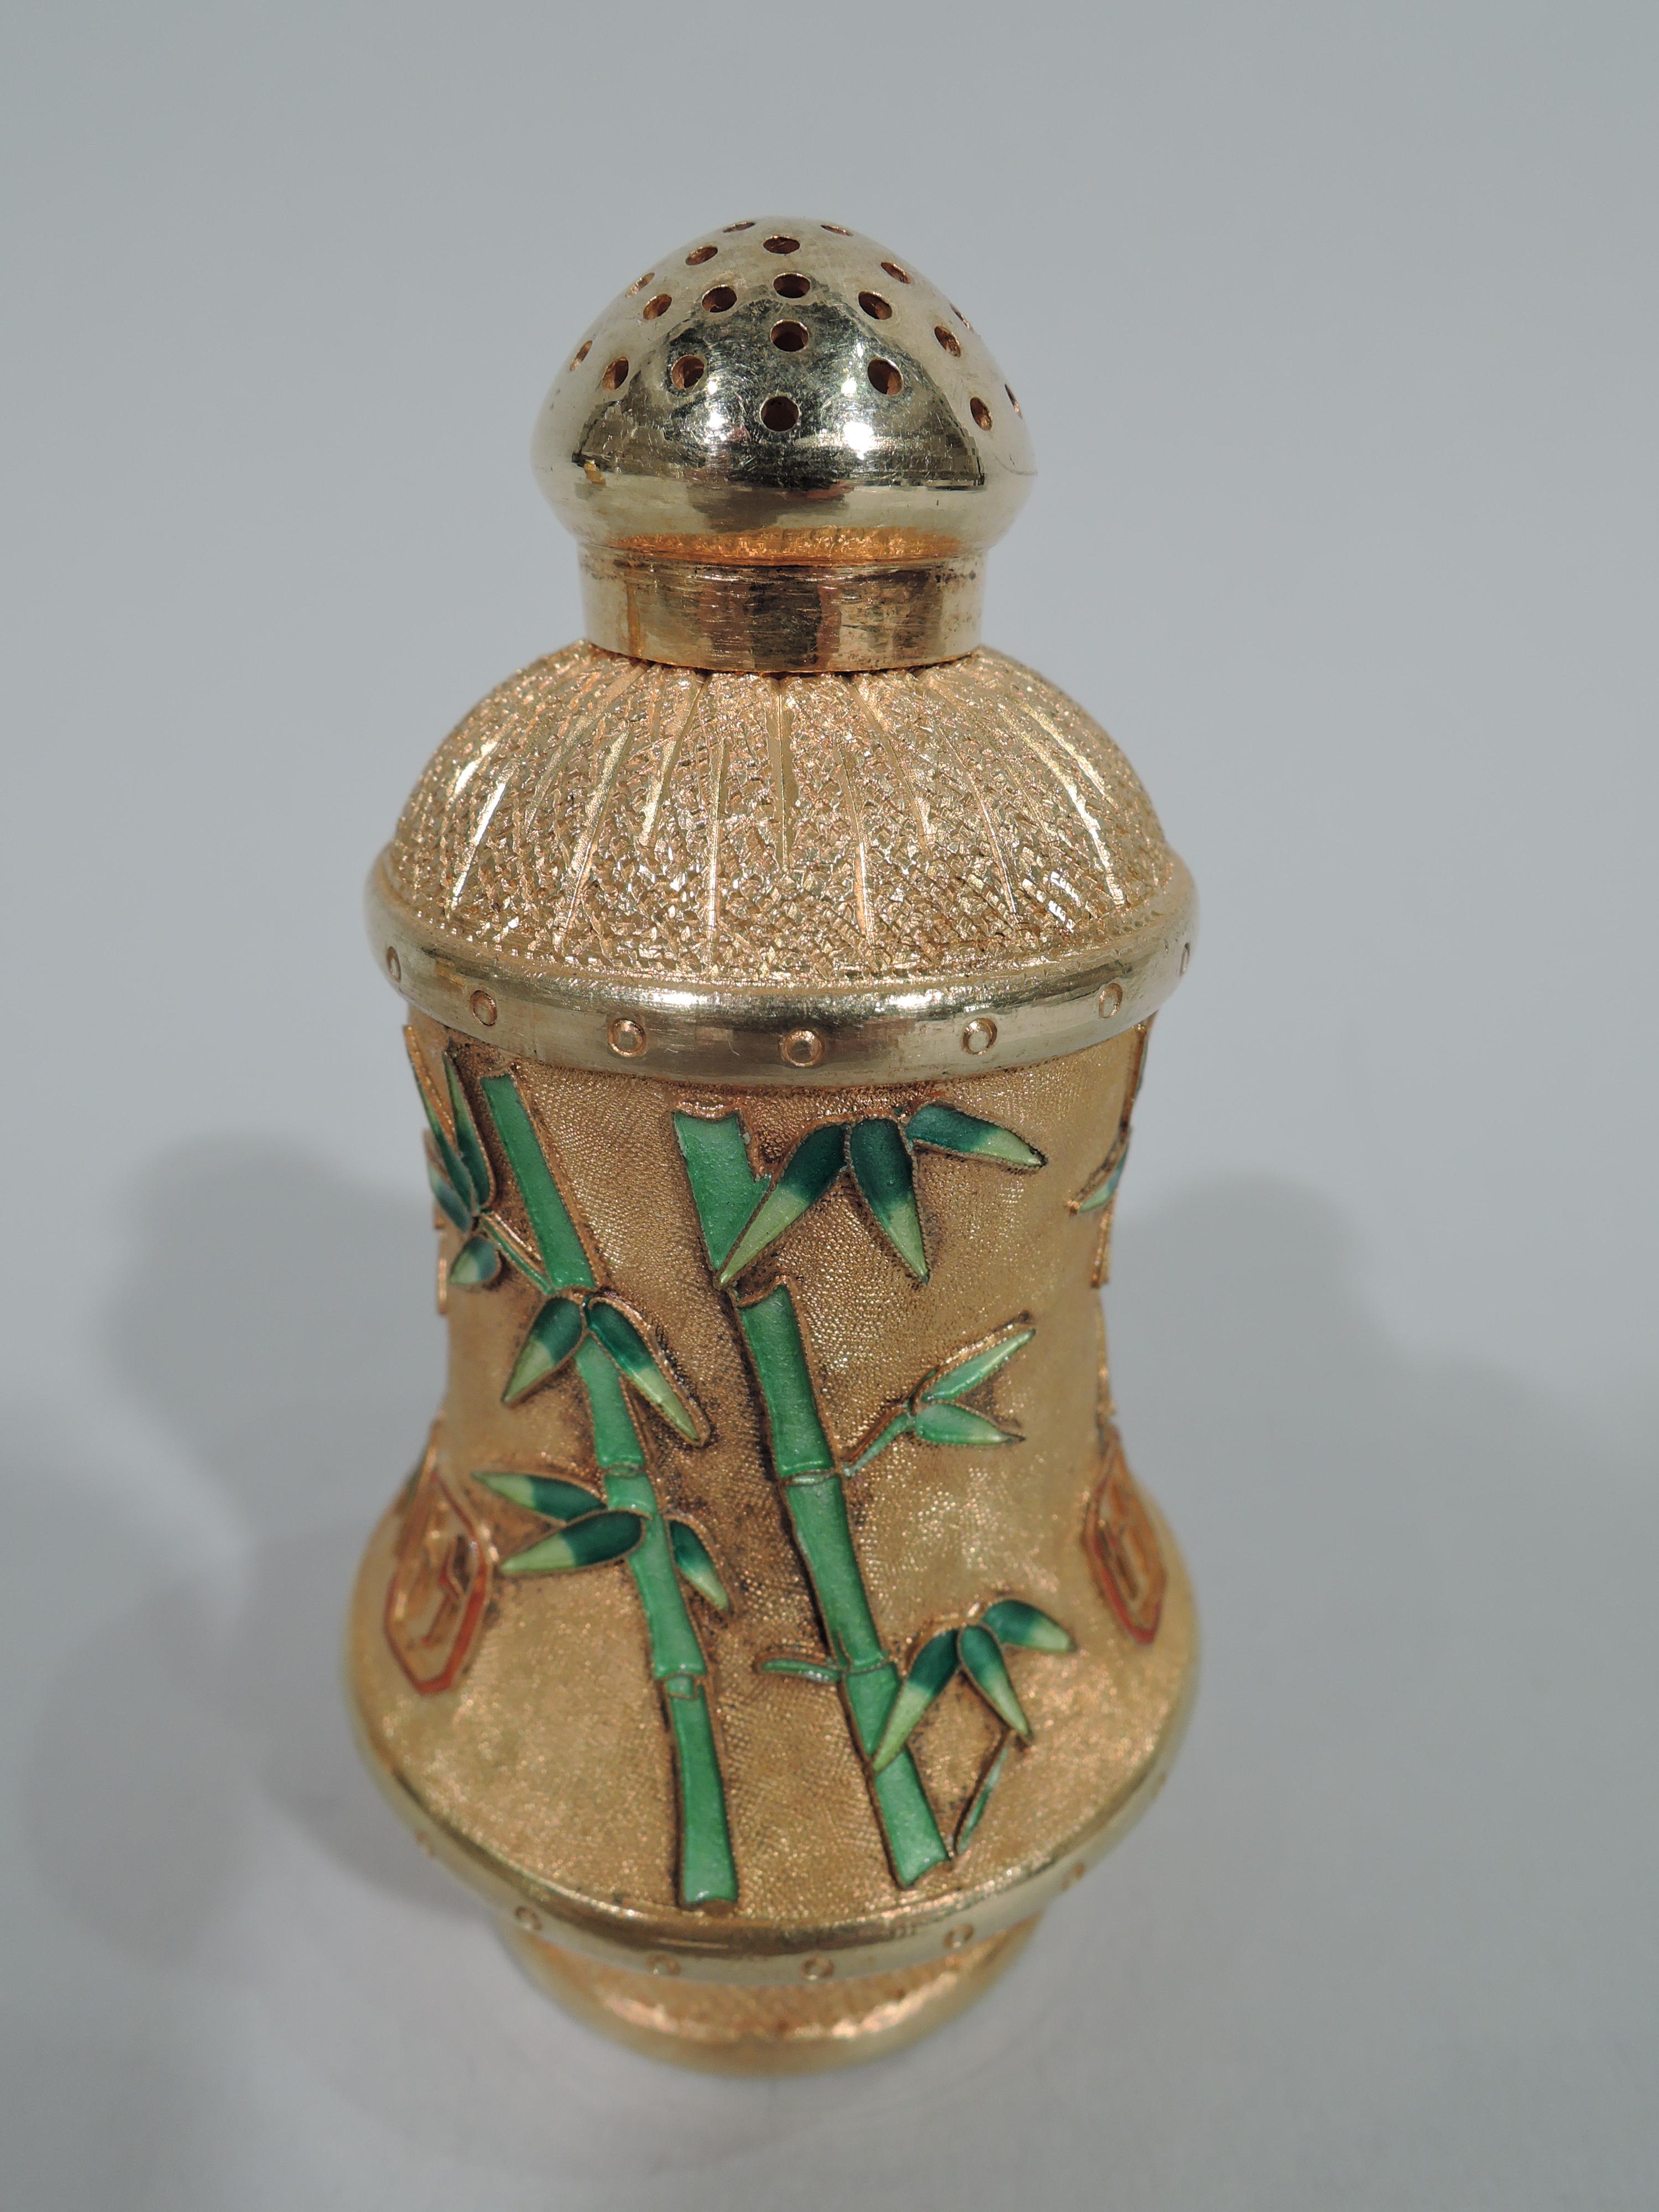 Pair of Chinese export silver gilt and enamel salt and pepper shakers. Baluster with enameled bamboo and characters on stippled ground. Gilt and pierced domed, and threaded ball cover. Lots of period flavor. Marked “Silver”. Total gross weight: 3.8